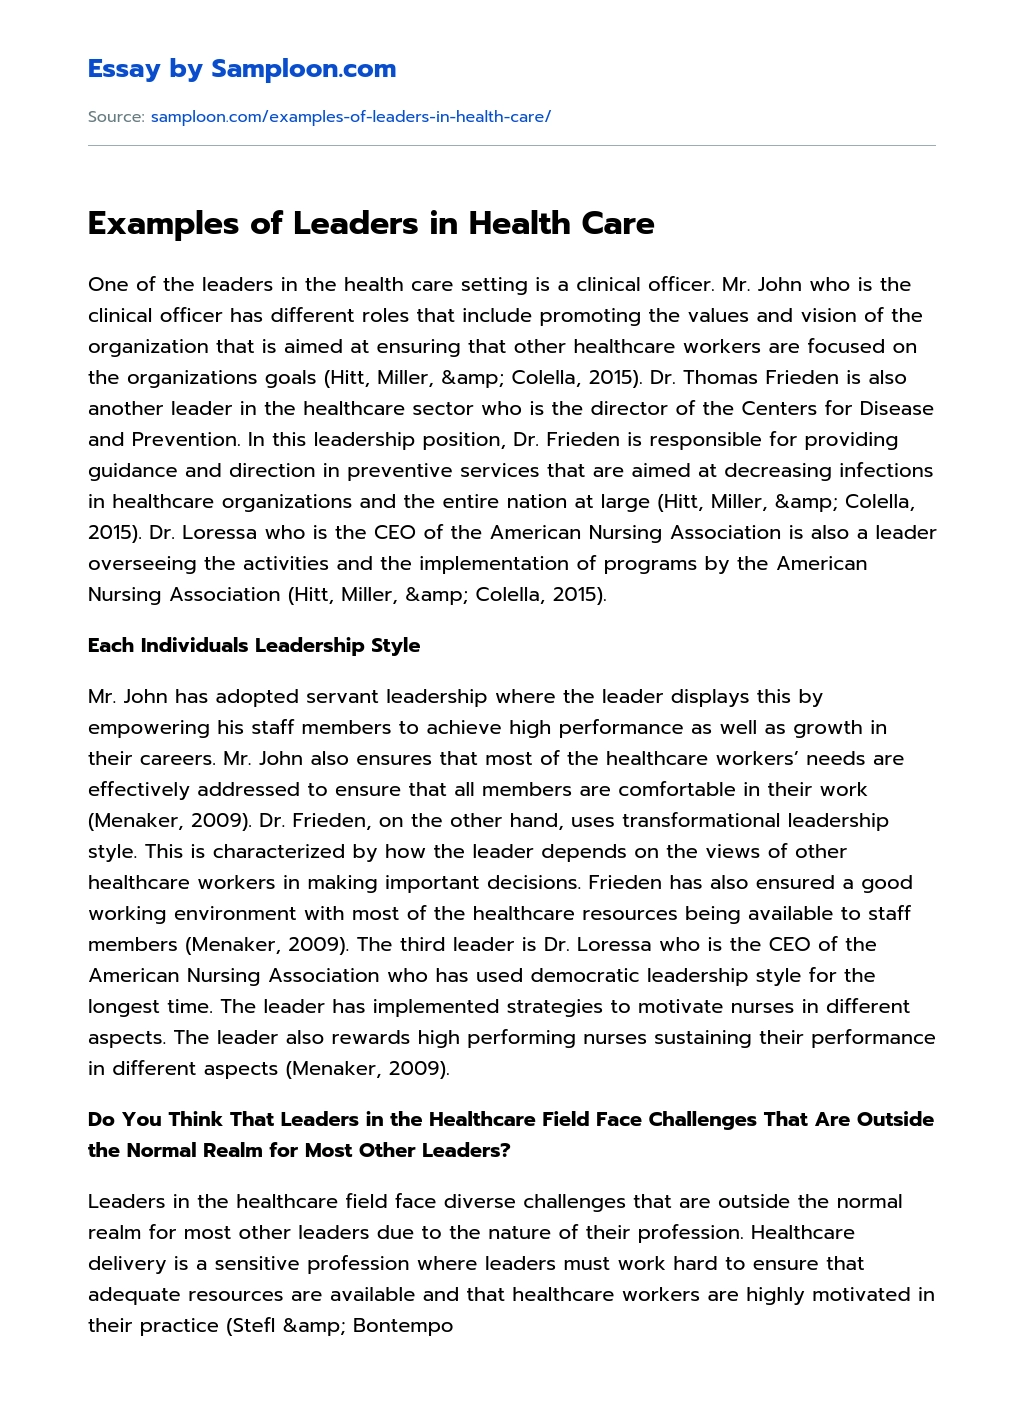 Examples of Leaders in Health Care essay